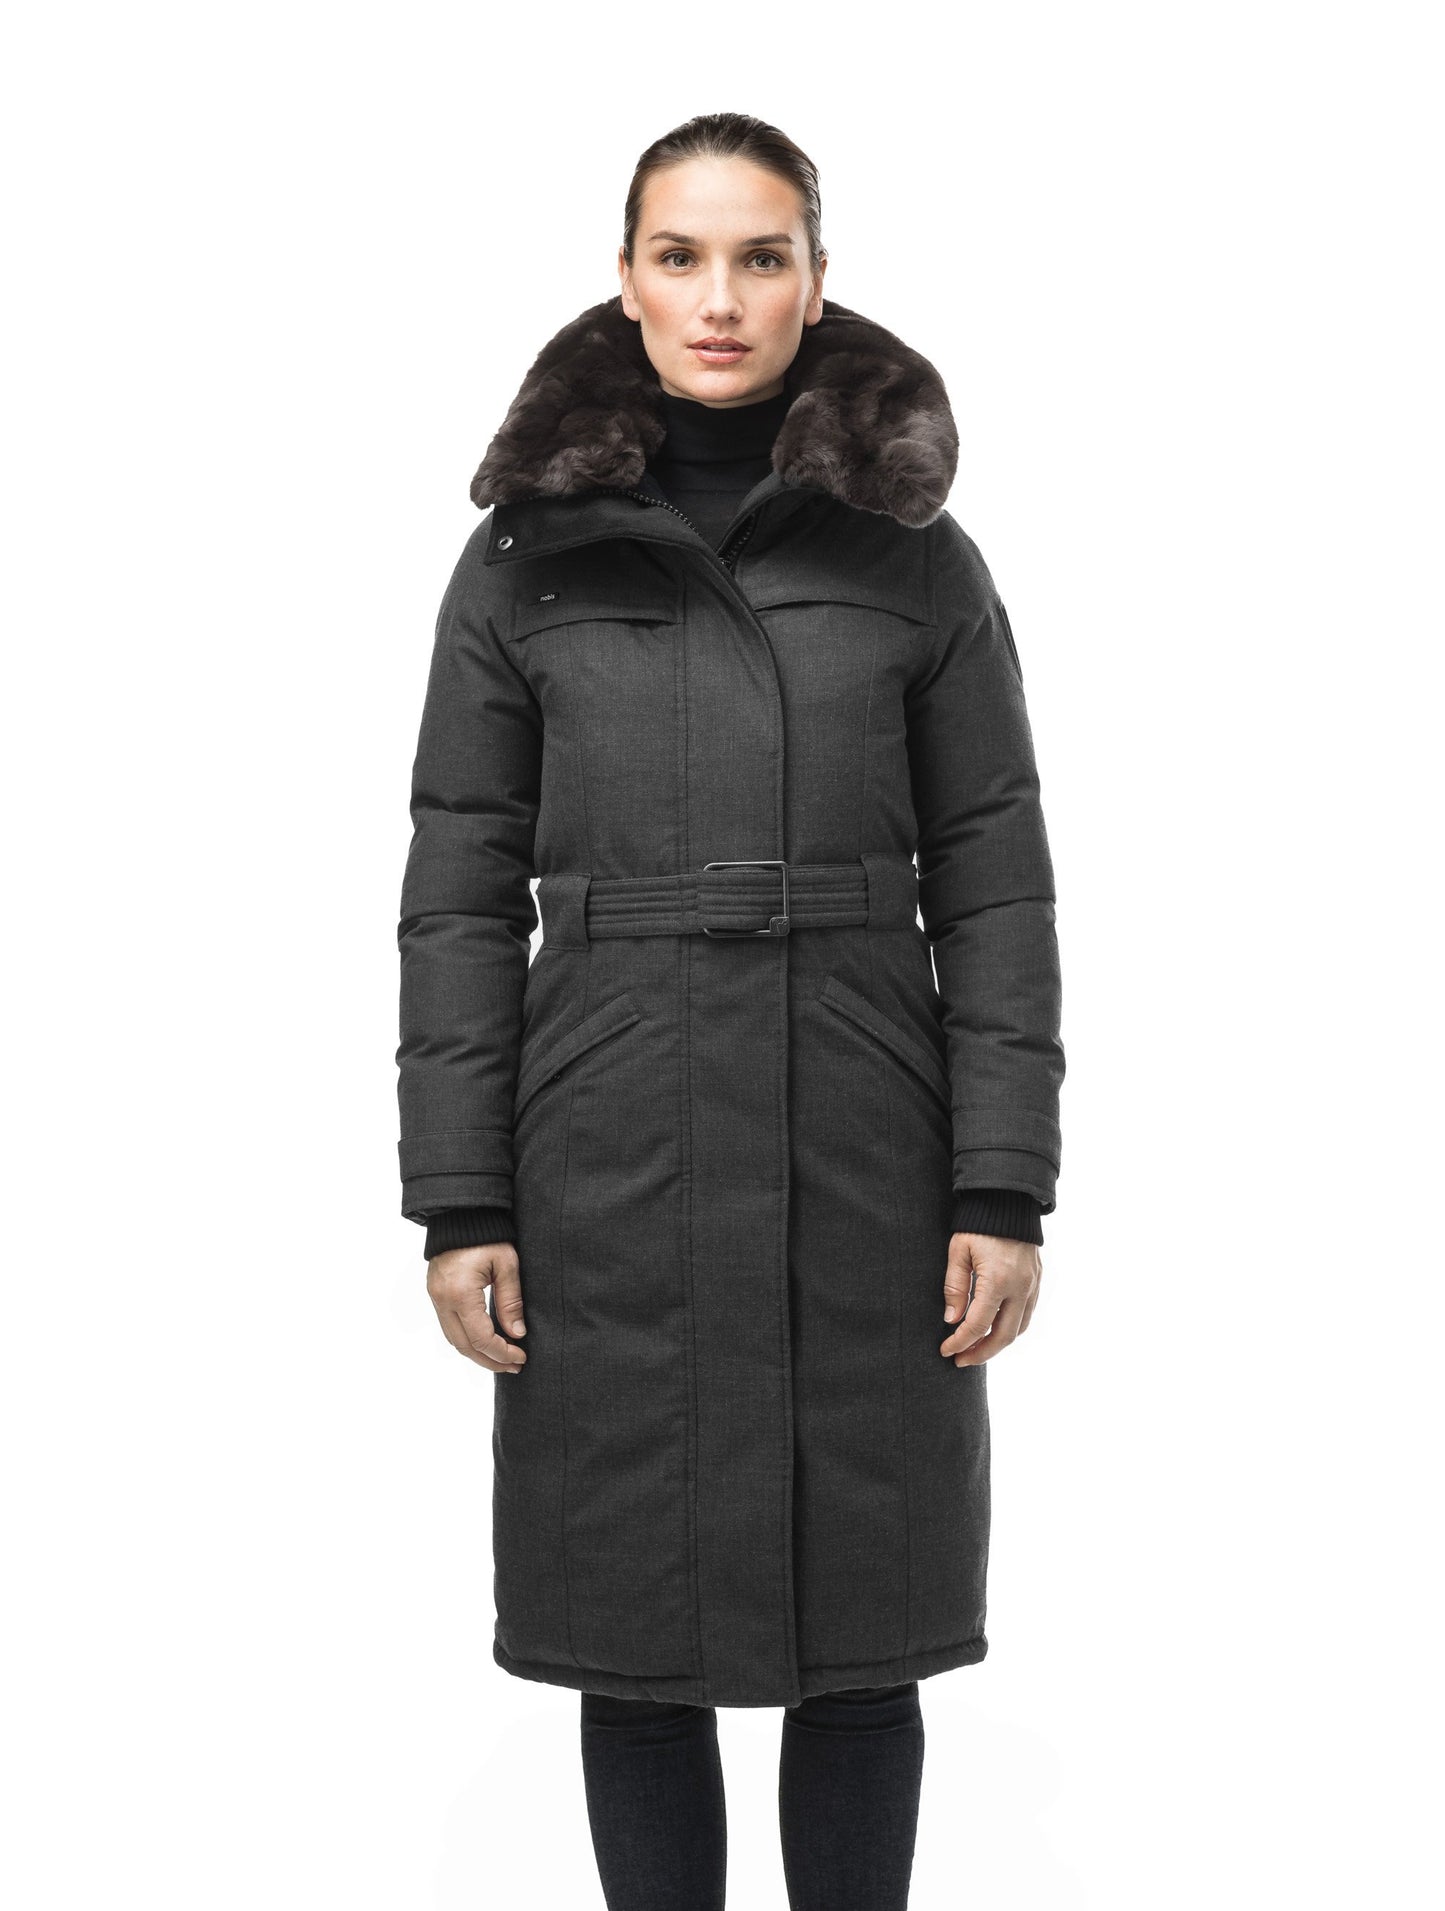 Women's knee length down filled parka with a belted waist and fully removable Coyote and Rex Rabbit fur ruffs in H. Black